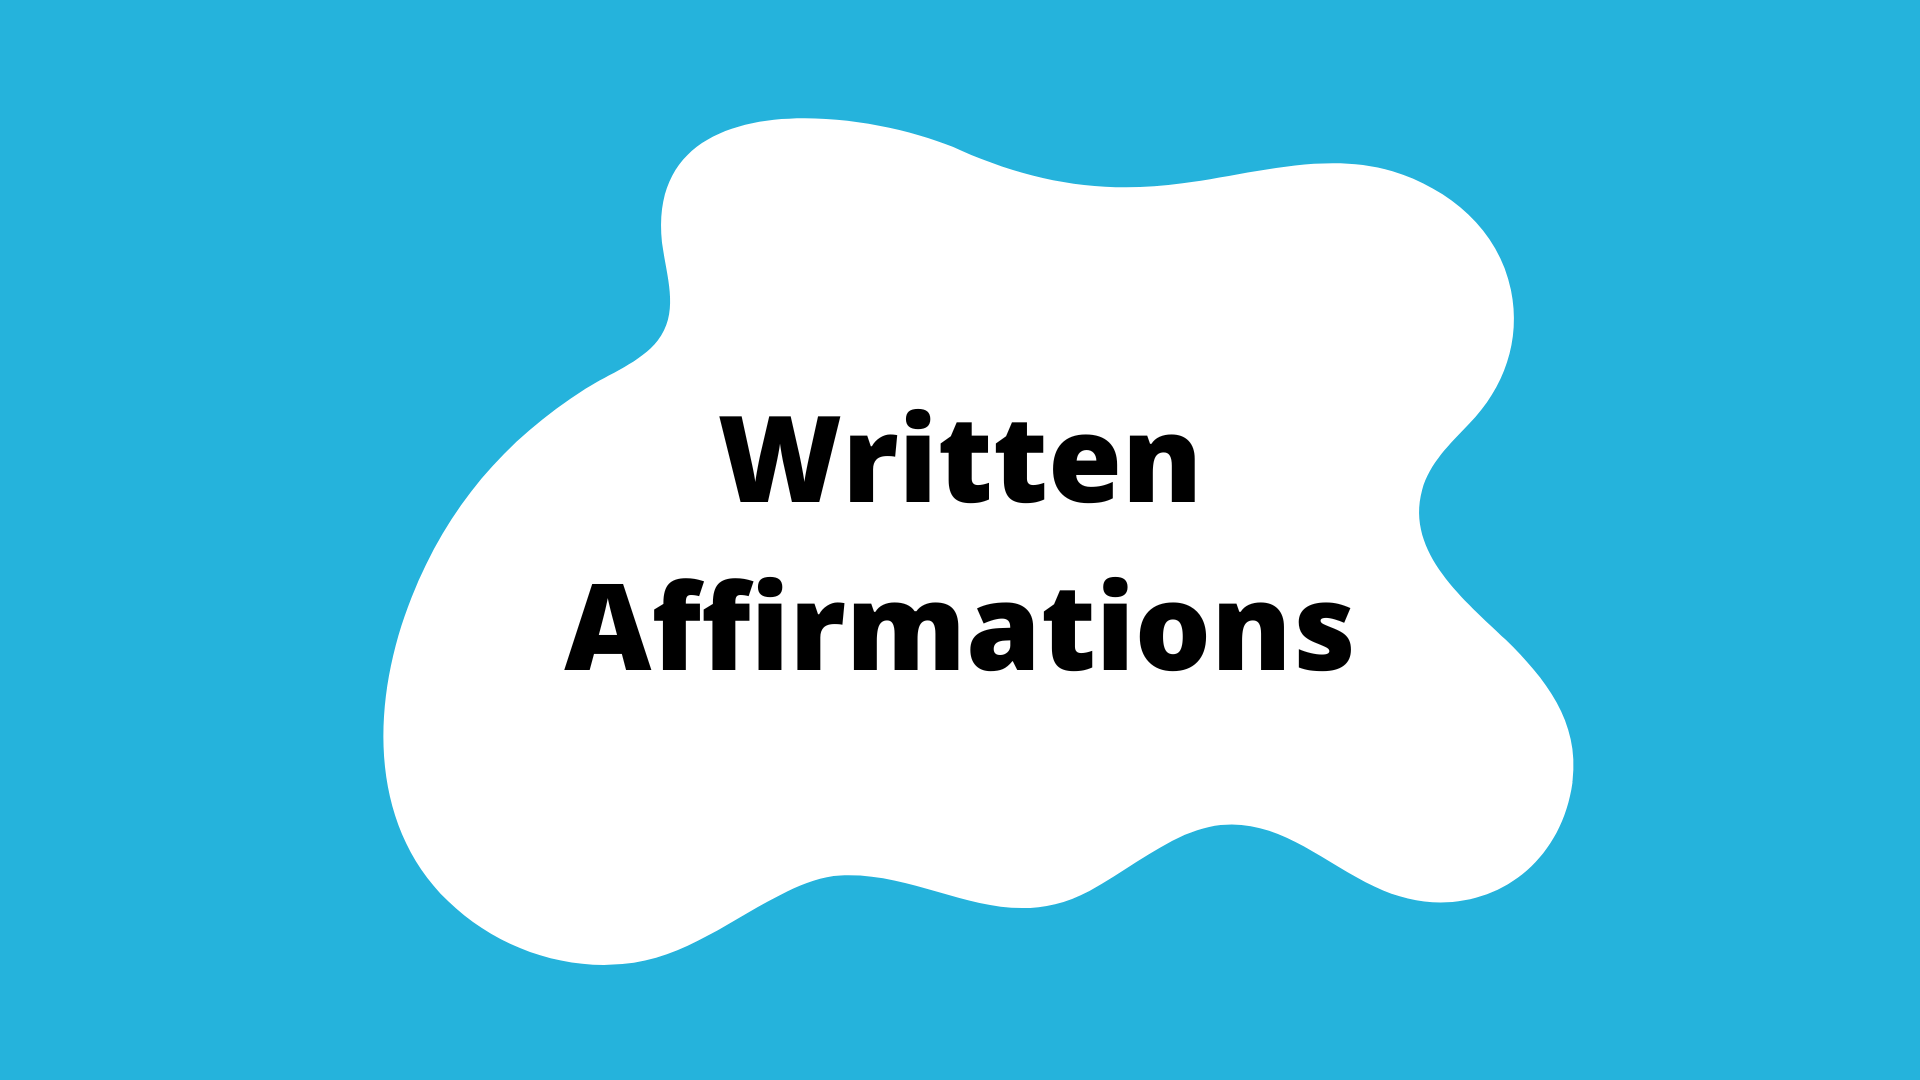 "Written Affirmations" activity button. It is a blue square with a white blob in the center. The title is in the blob.